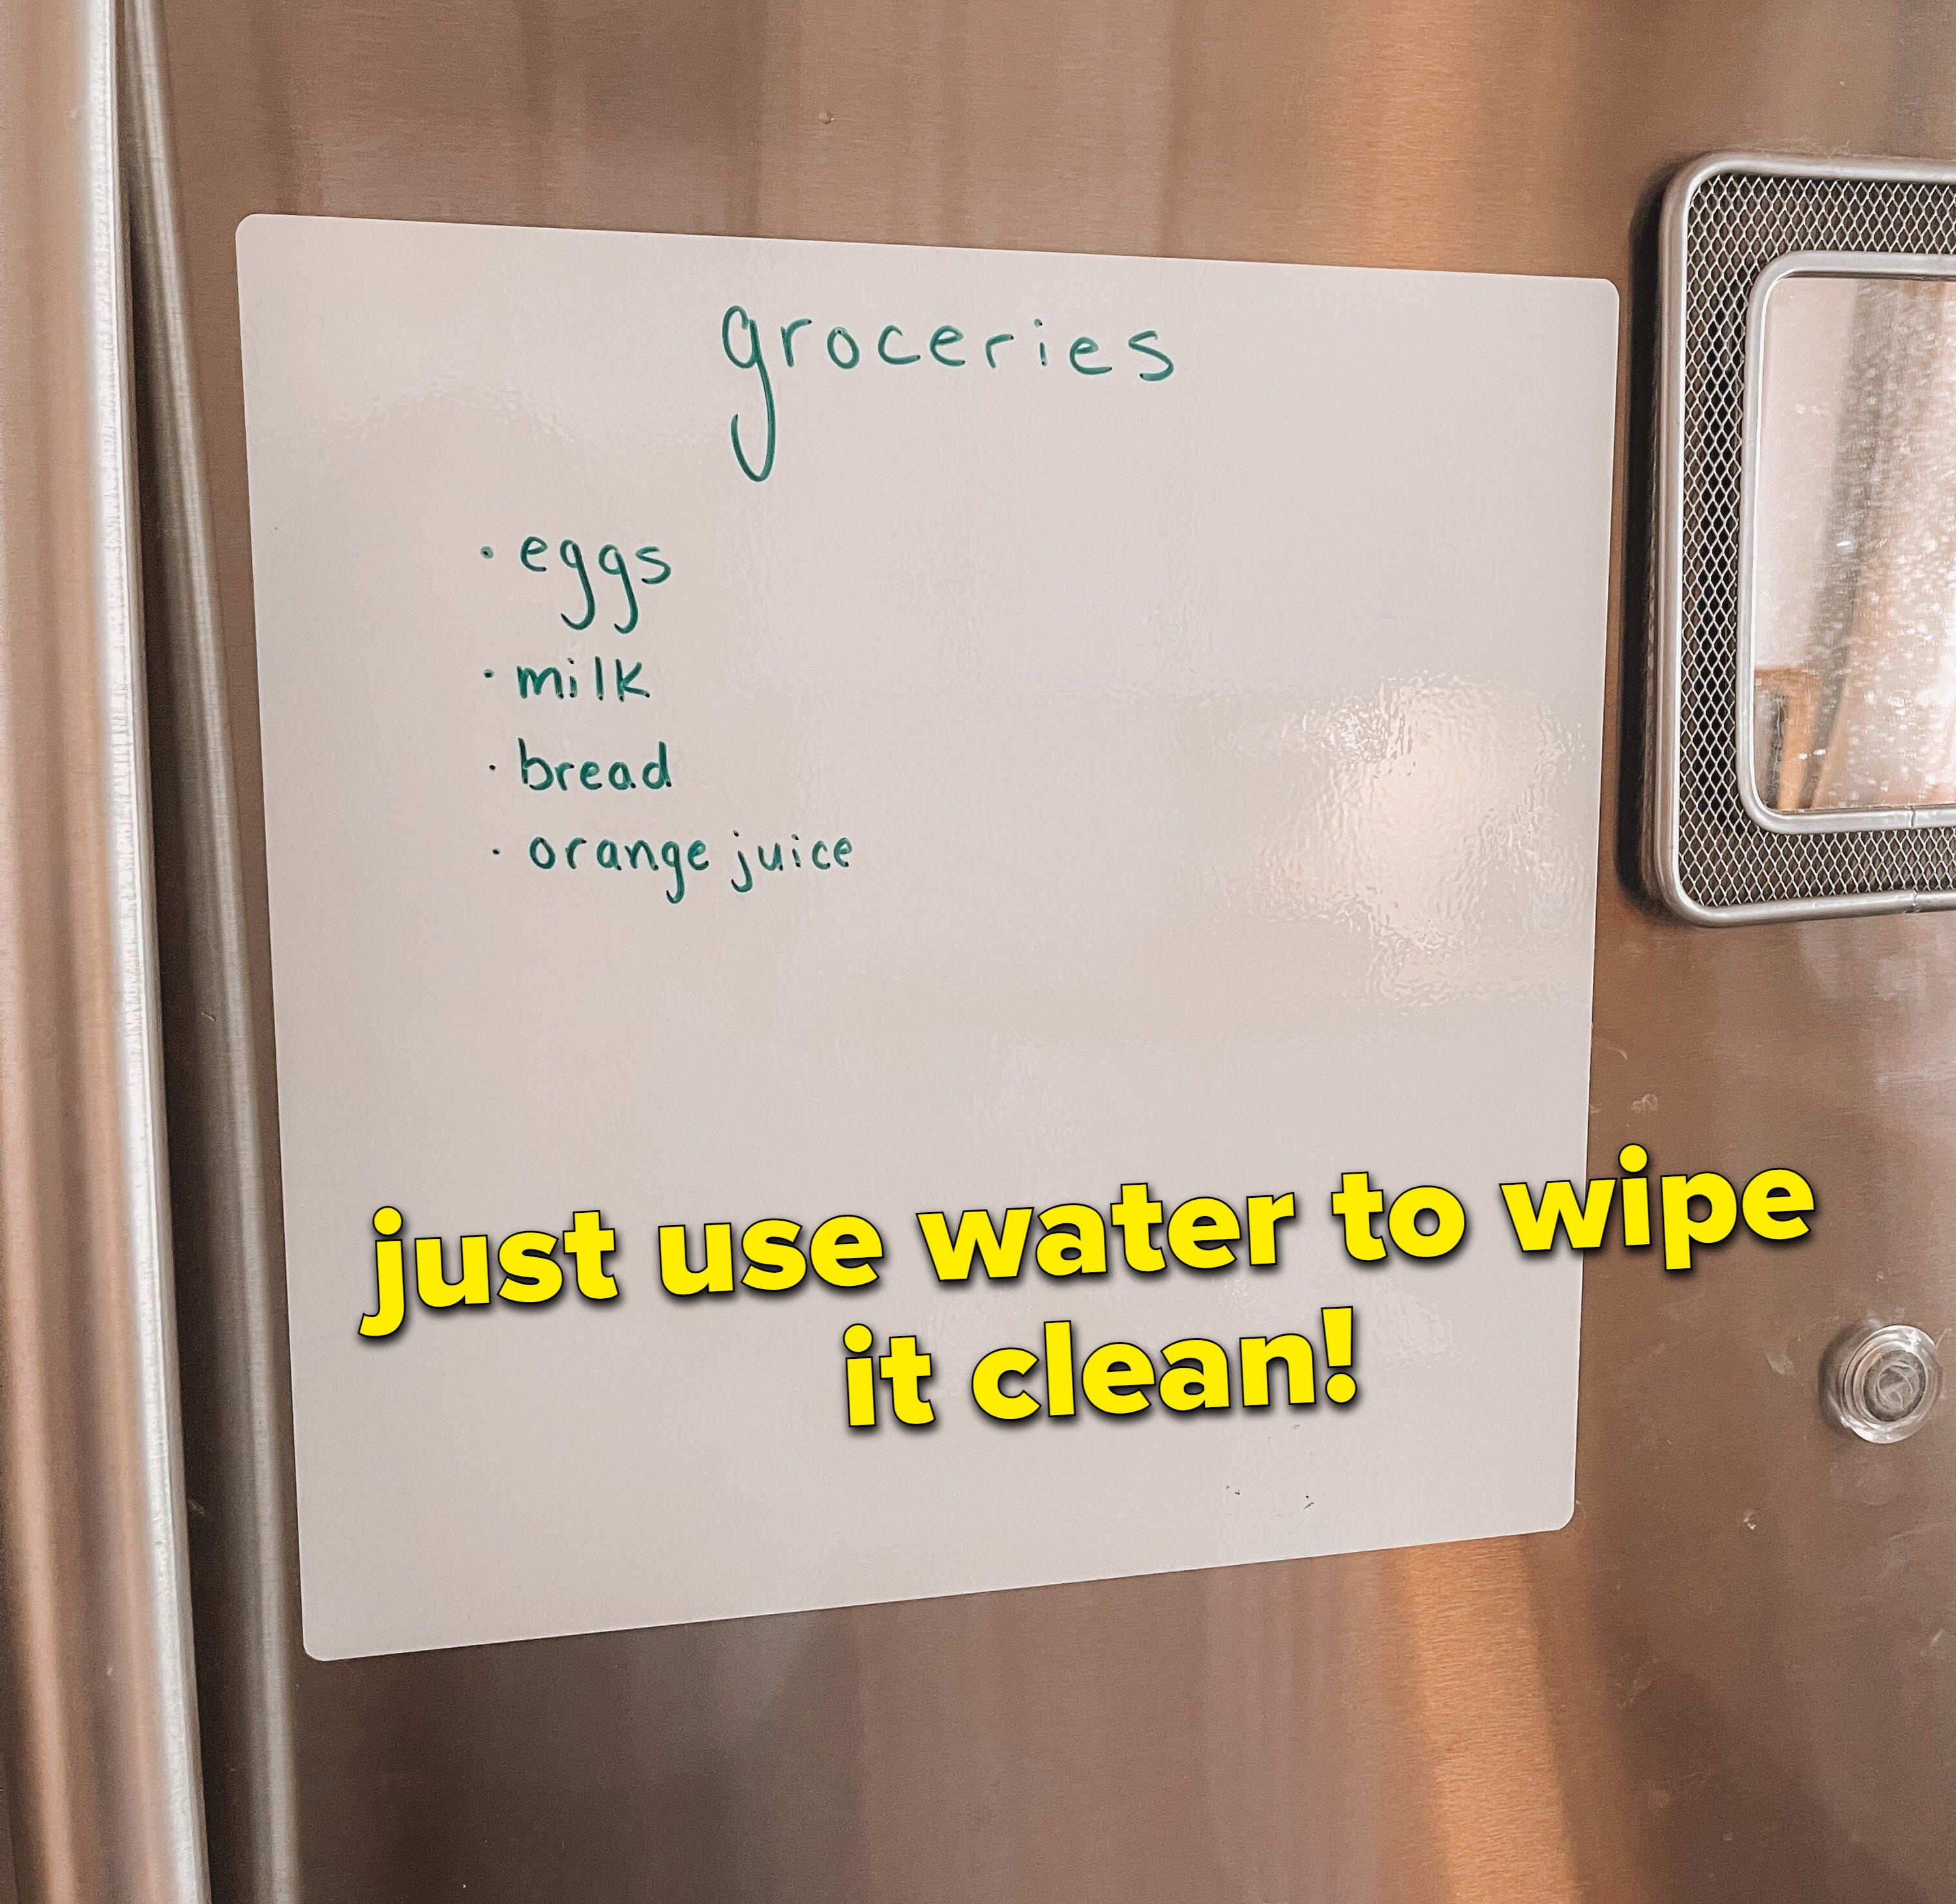 The white board on a stainless steel fridge that says &quot;groceries: eggs, milk, bread, and orange juice&quot; in list format